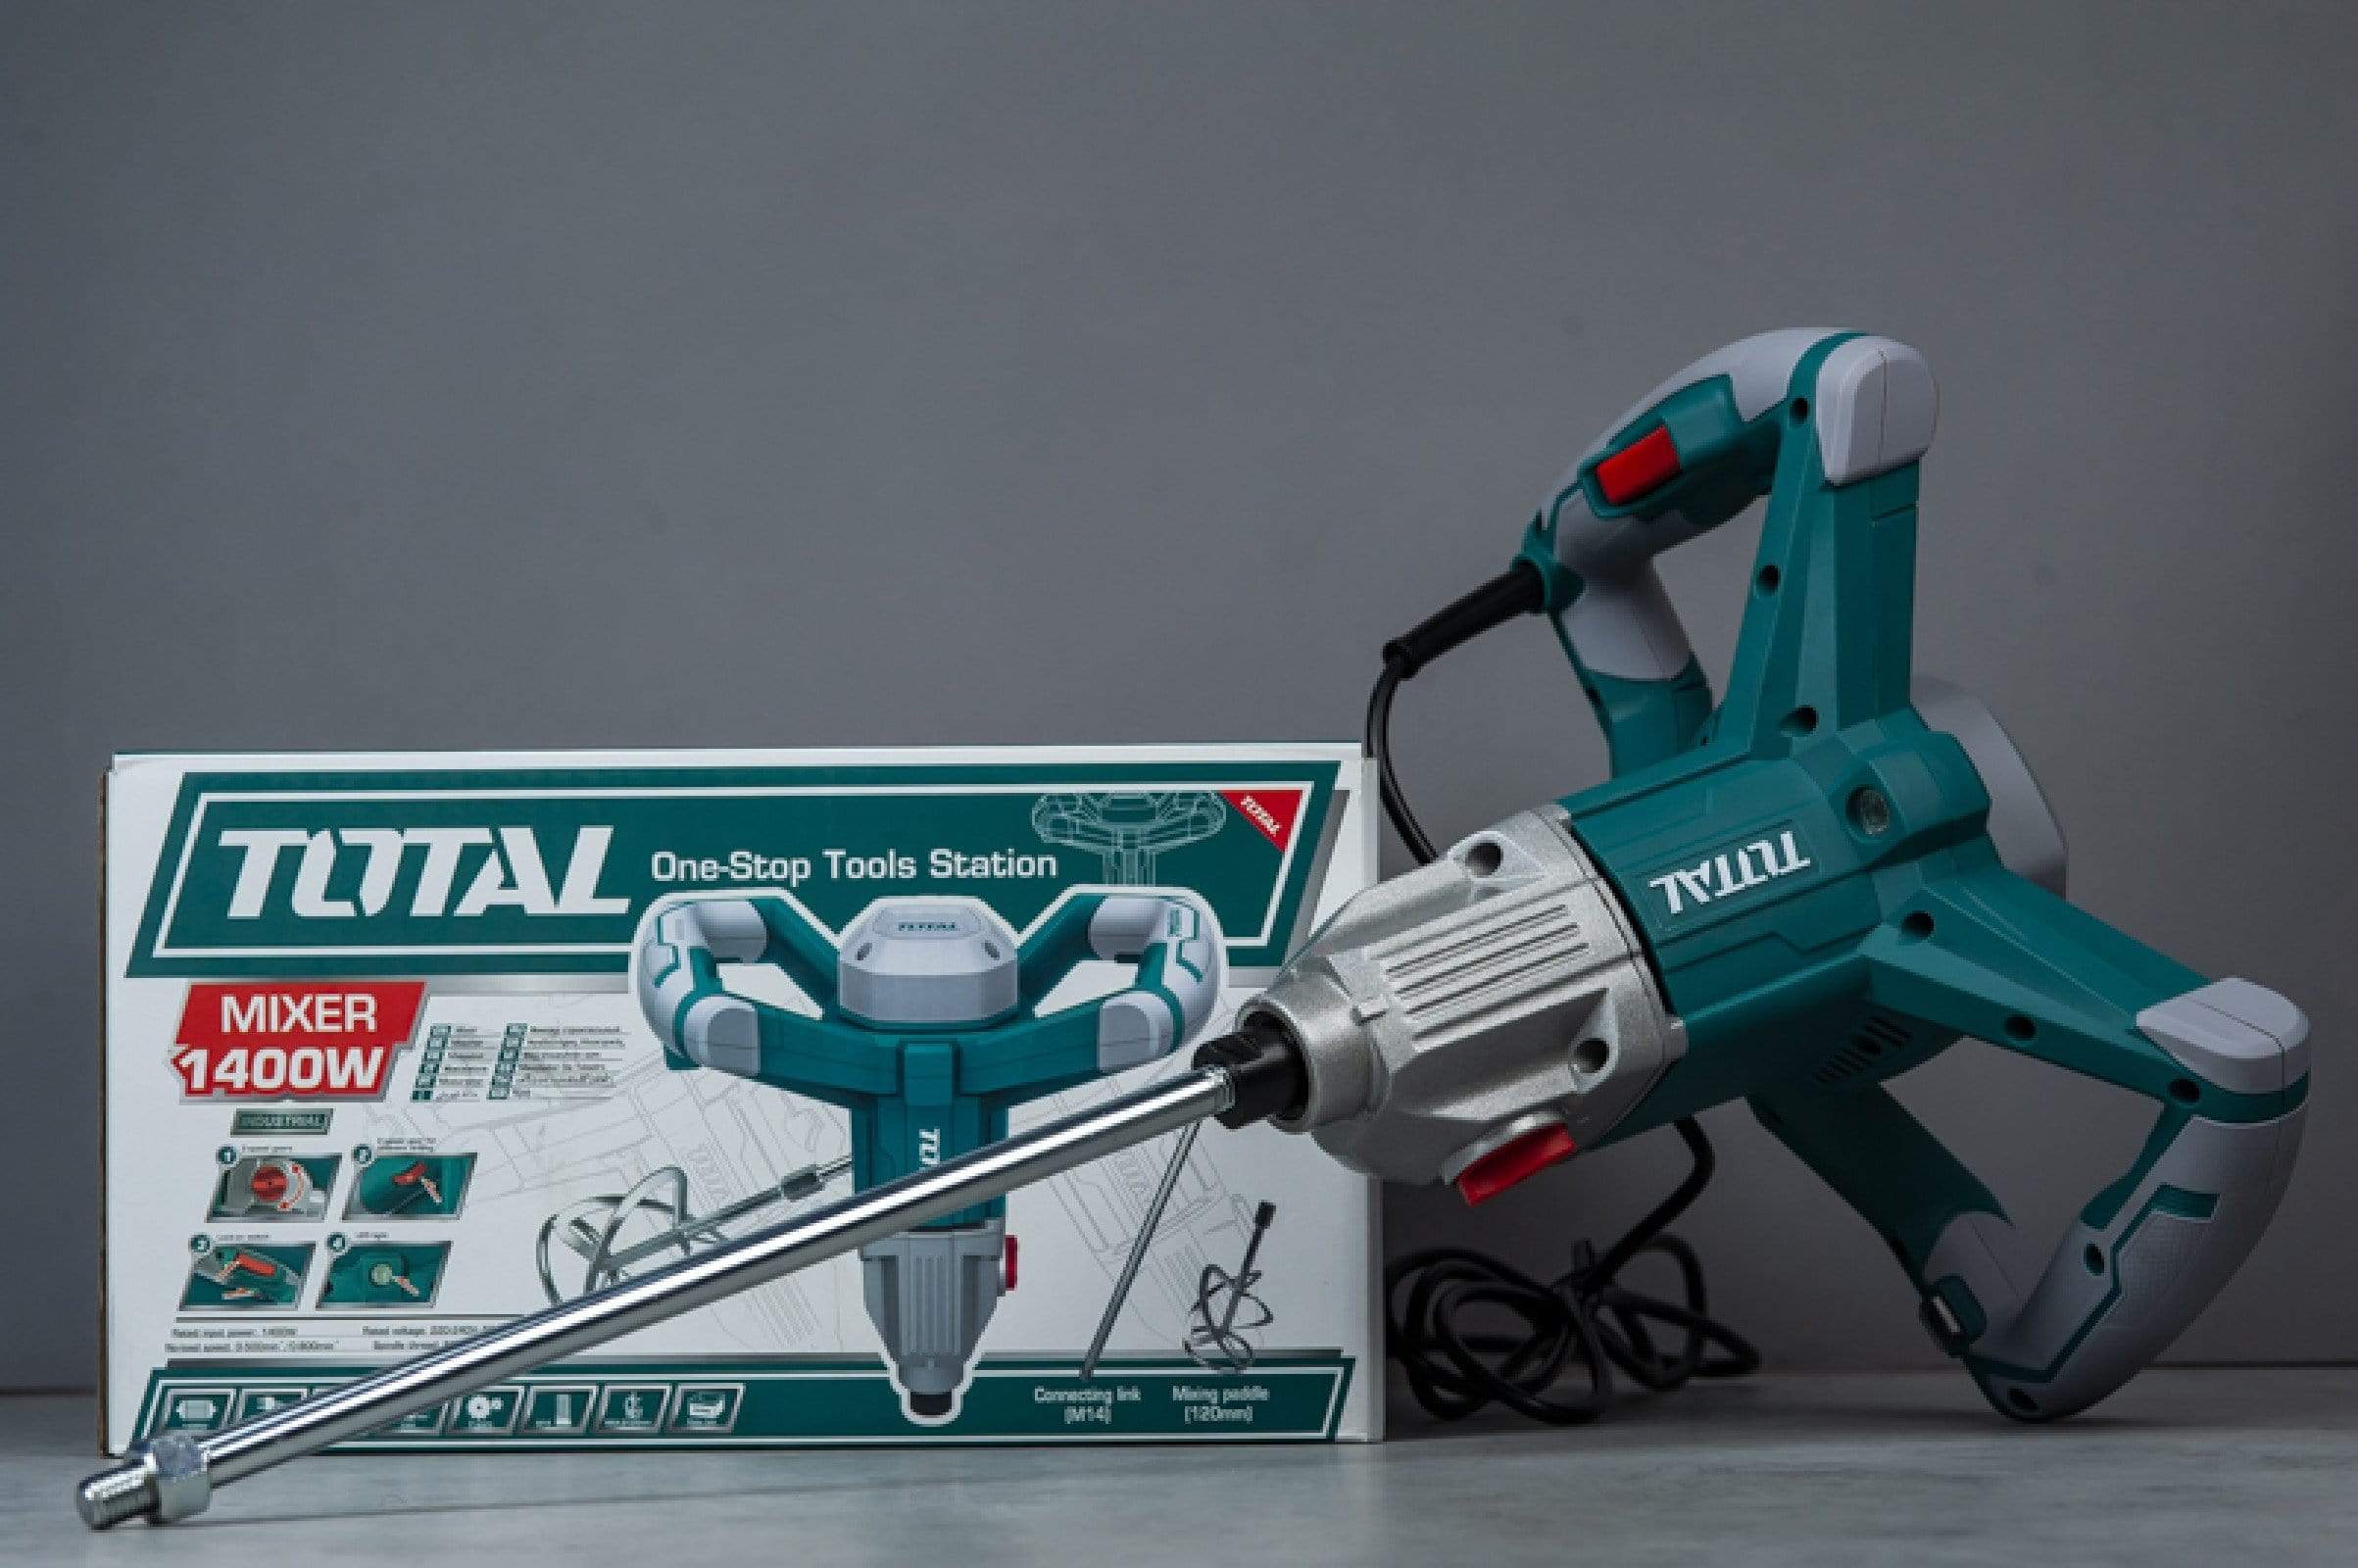 Total Electric Mixer 1400W - TD614006 | Supply Master | Accra, Ghana Tools Building Steel Engineering Hardware tool